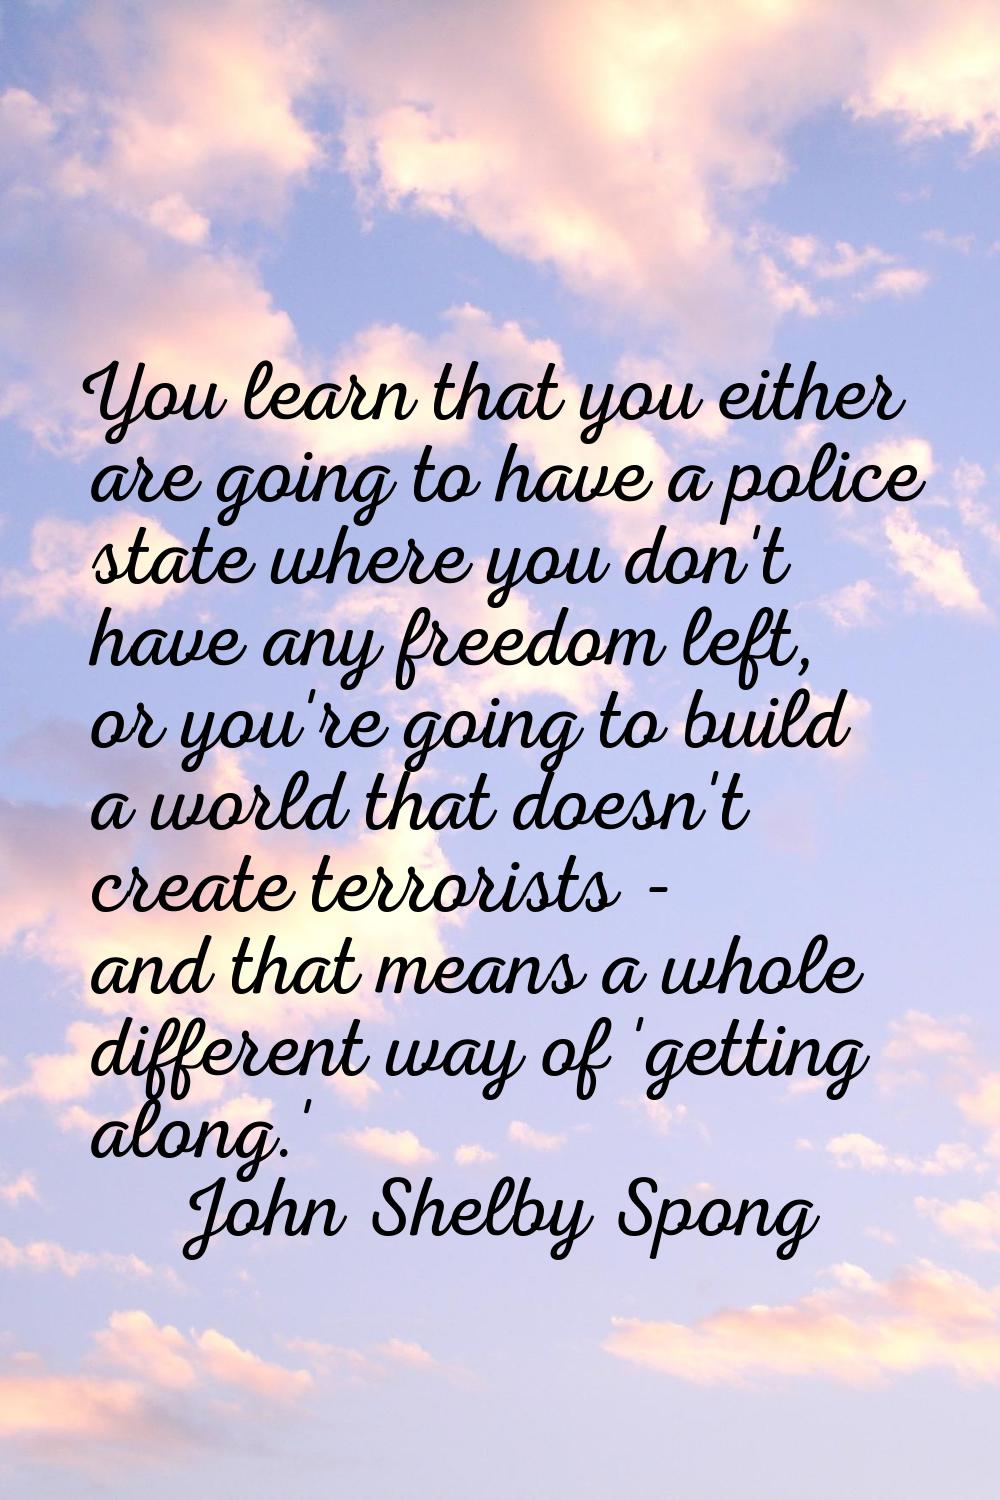 You learn that you either are going to have a police state where you don't have any freedom left, o